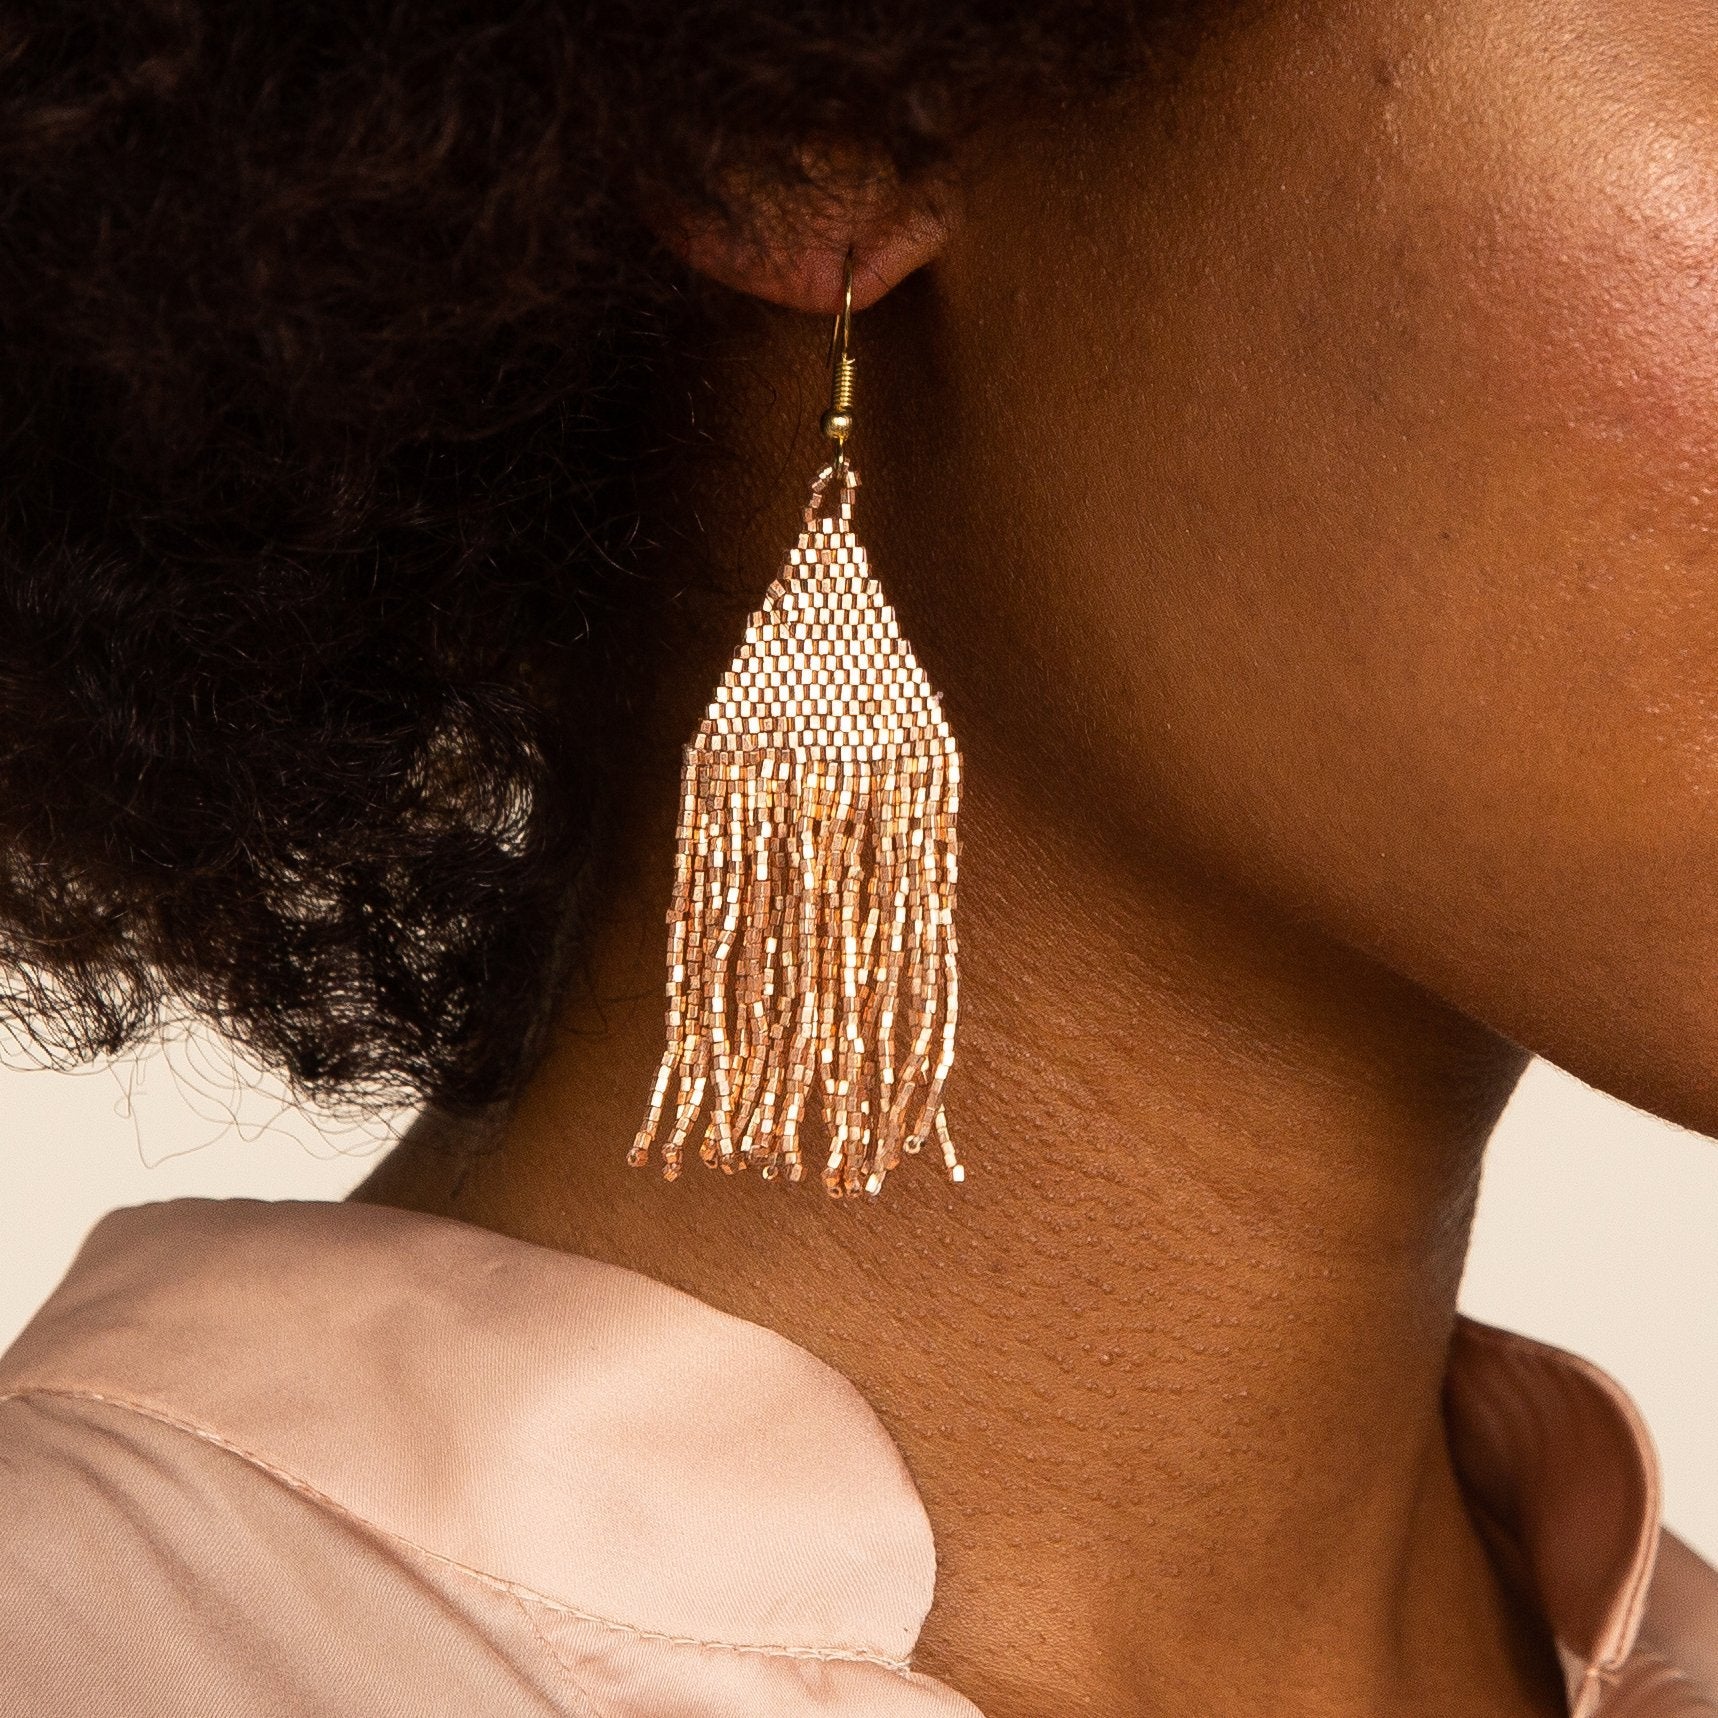 Rose Gold Petite Luxe Earring - Global Hues Market